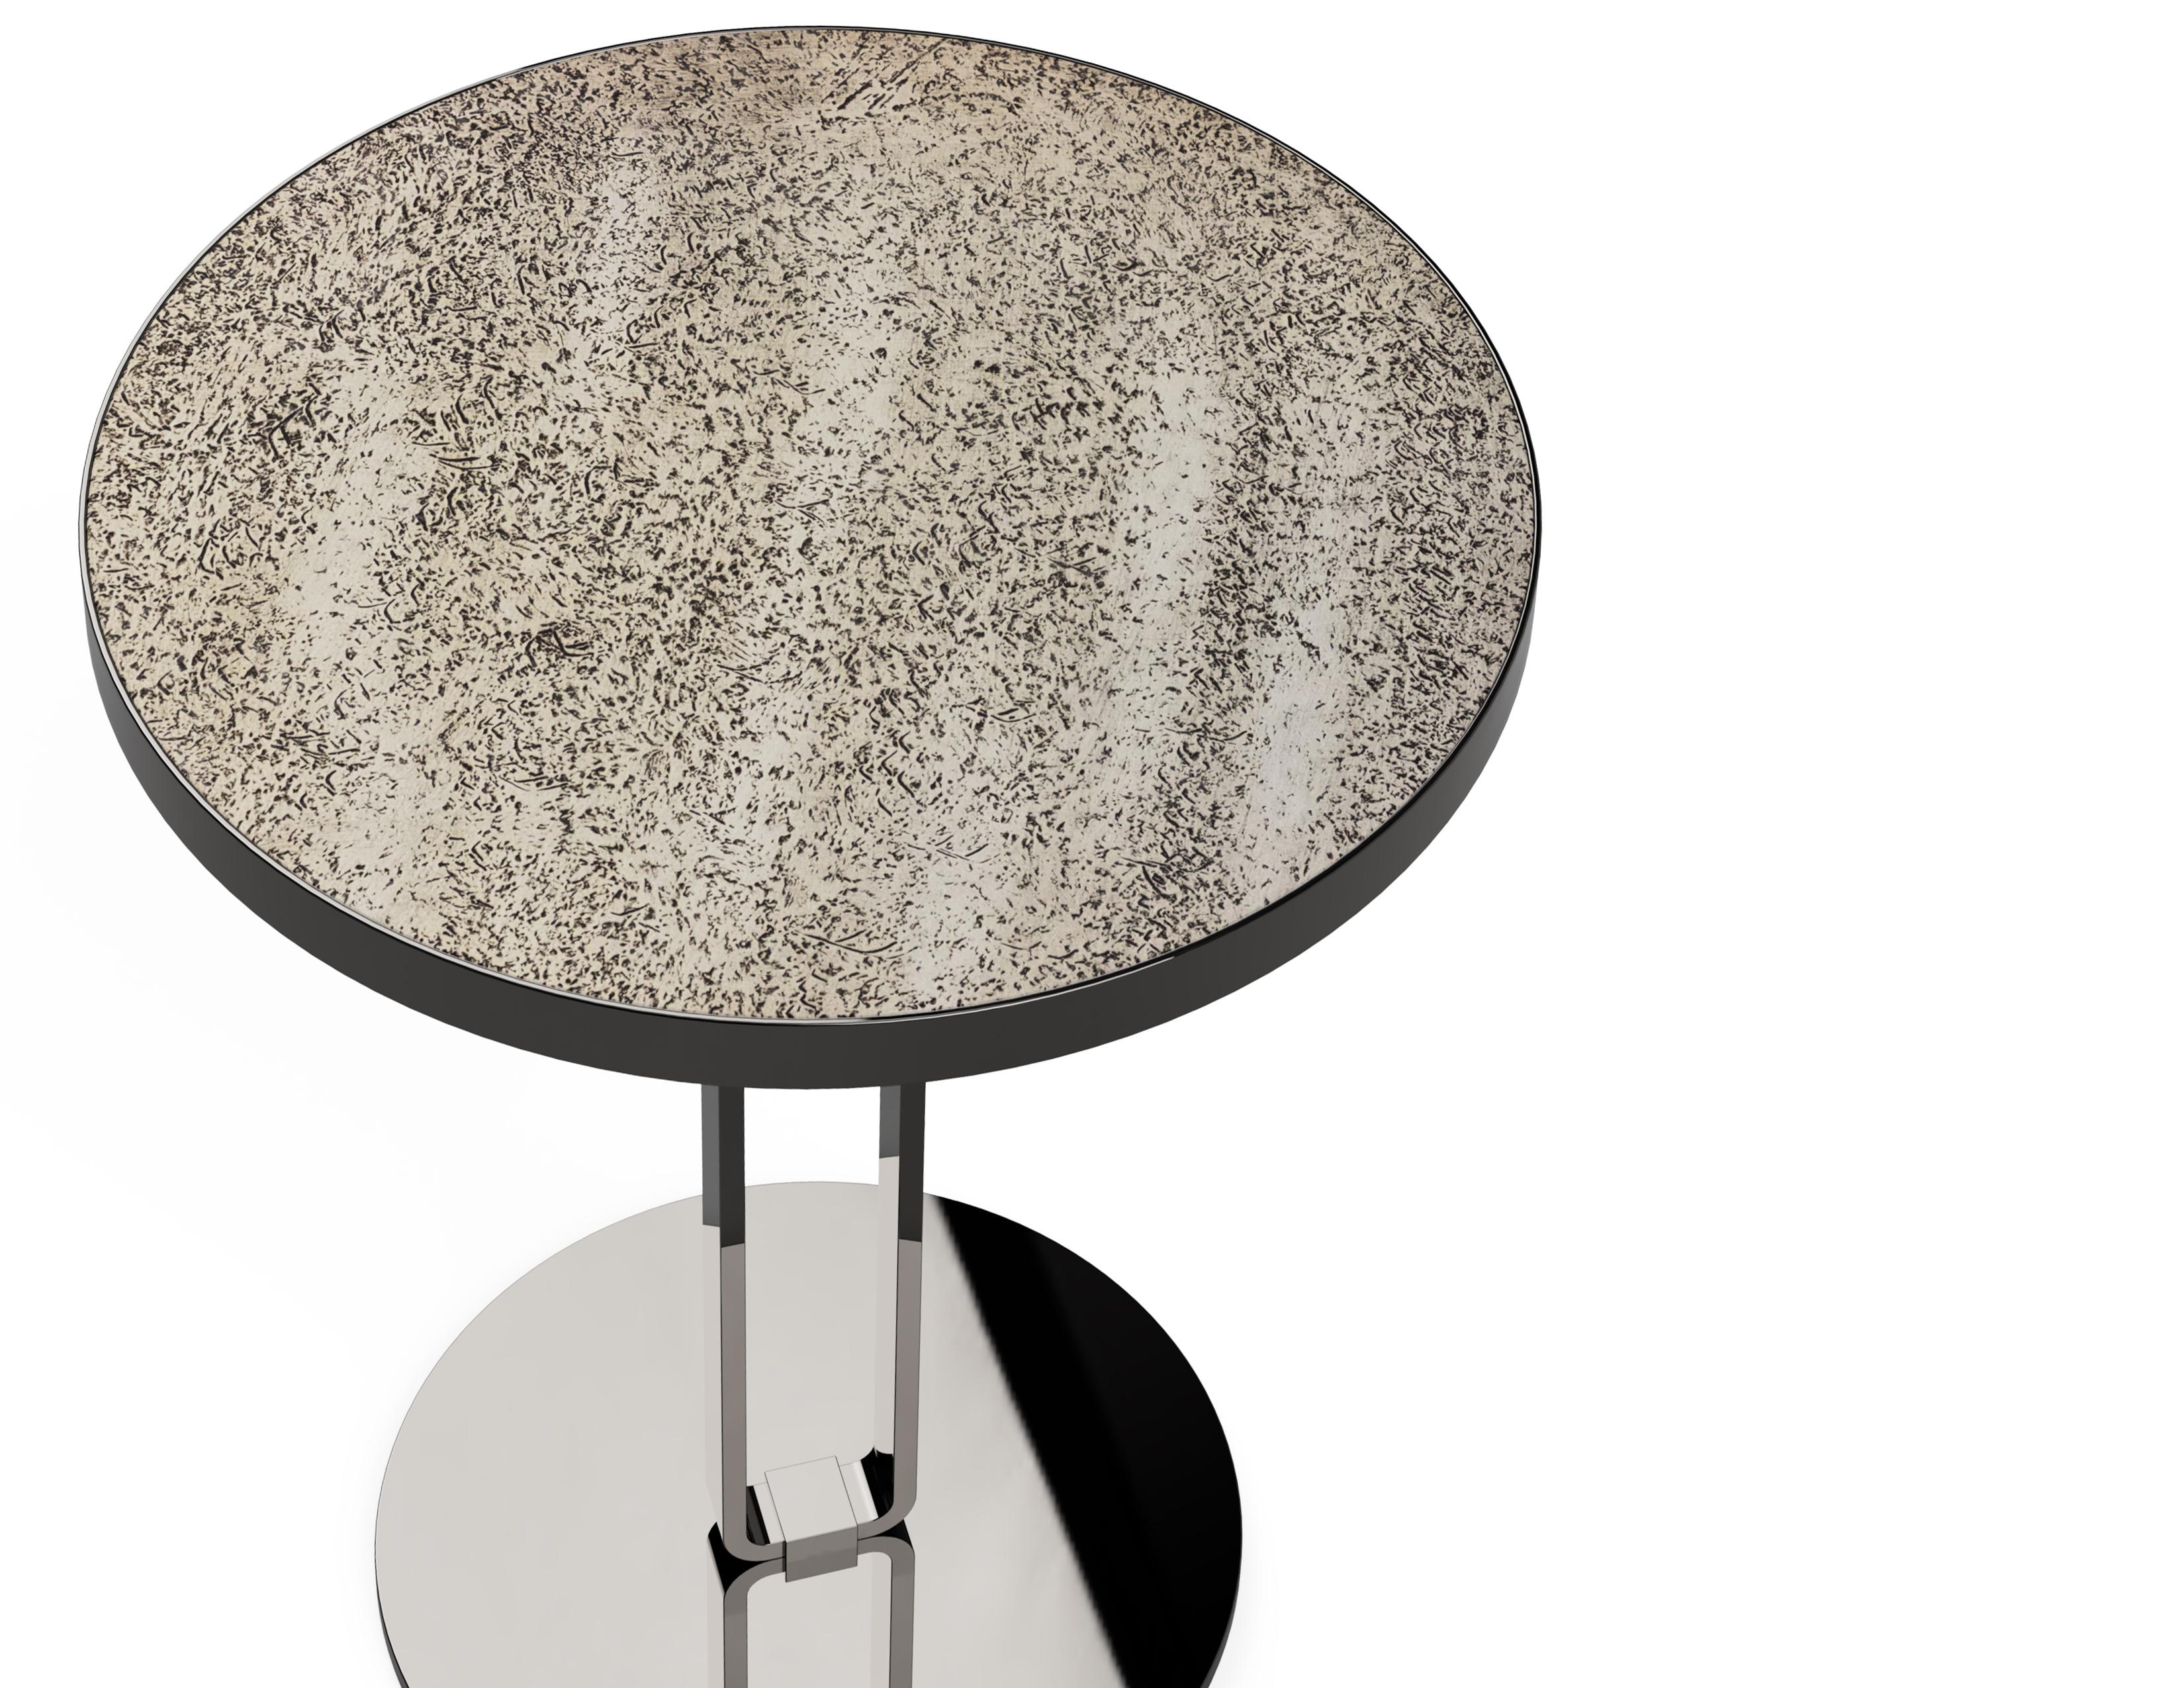 Texture adds life and value to a space, so does a unique design. “Budak Side Table” is the perfect combination of both. The linear base of the Budak is in perfect harmony with the textured lacquered top which is crafted by hand creating a 3D